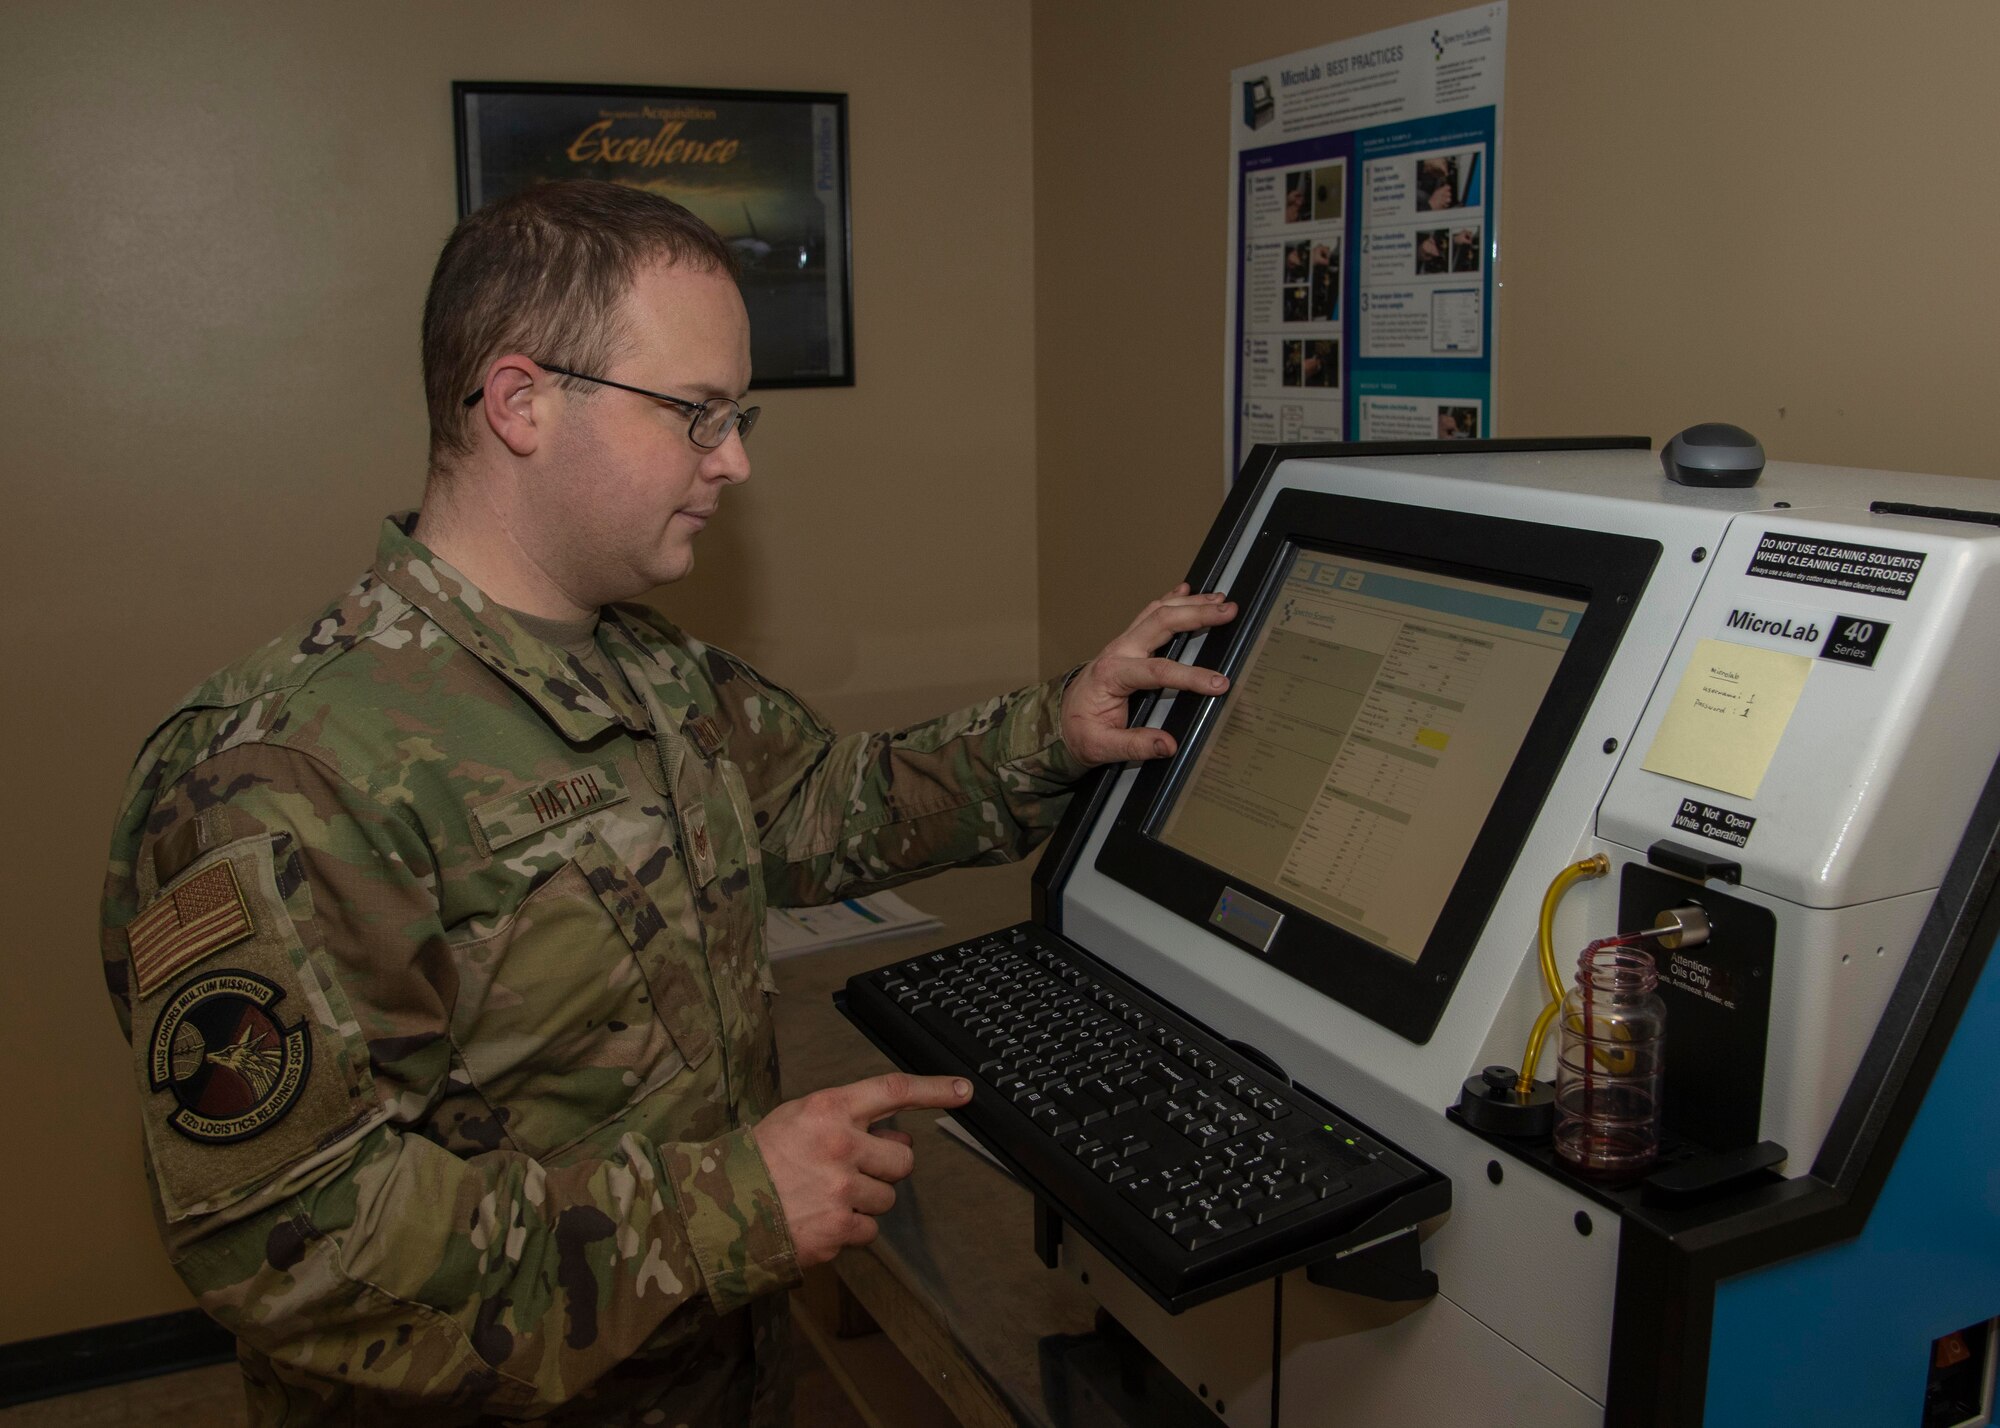 U.S. Air Force Staff Sgt. Kurt Hatch, 92nd Logistics Readiness Squadron assistant noncommissioned officer in charge, evaluates the results of transmission fluid analyzed by the Micro Lab 40 Series at Fairchild Air Force Base, Washington, Nov. 4, 2019. The oil analysis takes about five minutes per sample and provides data that technicians use to see if the oil needs to be changed or if there are indicators of future damage or component failure. (U.S. Air Force photo by Airman Anneliese Kaiser)